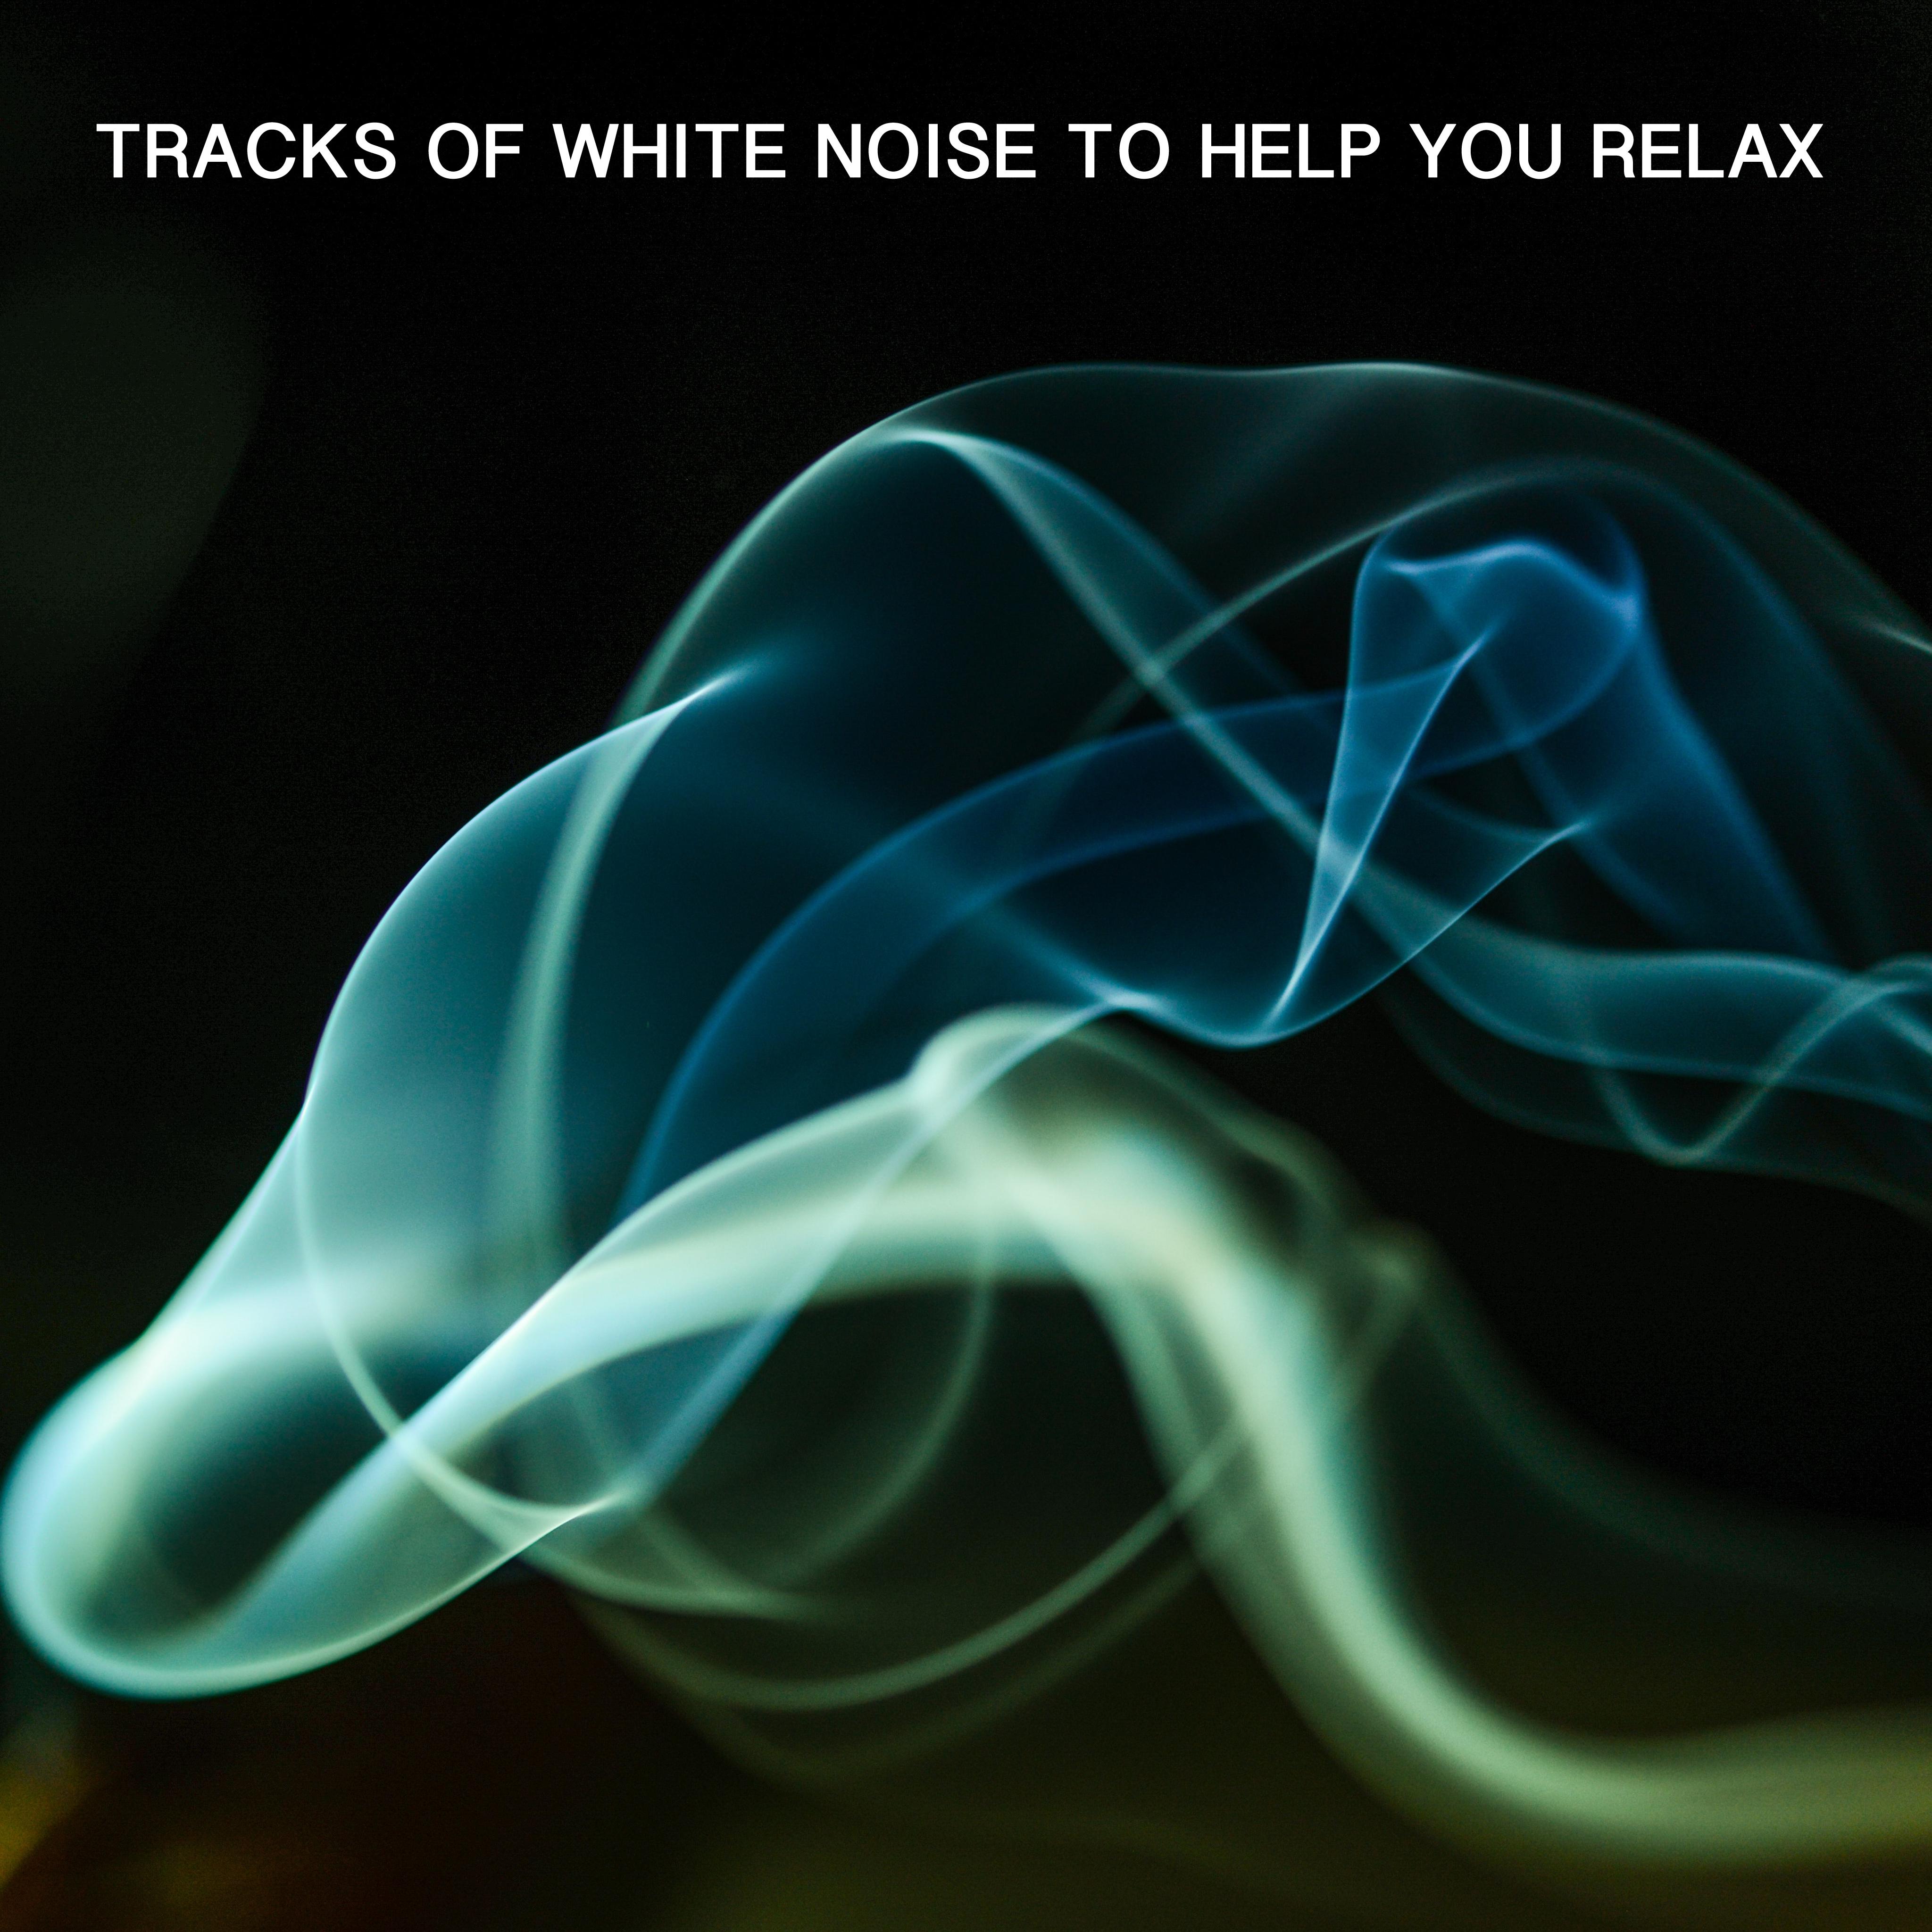 10 Tracks of White Noise to Help You Relax